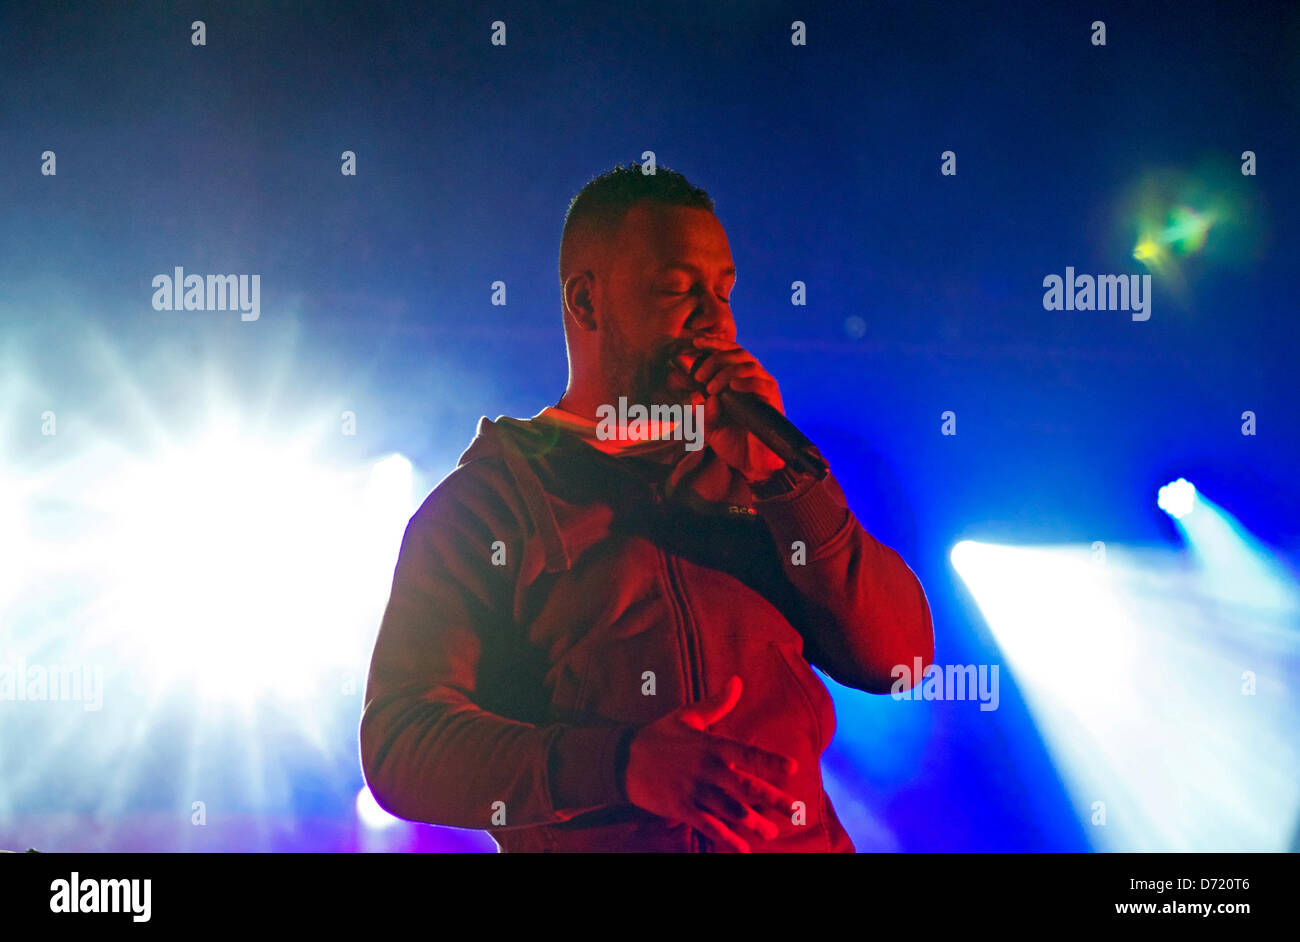 Almada, Portugal. April 24 2013. Boss AC and his band performs in Almada in a concert for 25 April day commemoration. The image shows a Boss AC band portrait during the concert. Credit: Bruno Monico/Alamy Live News Stock Photo